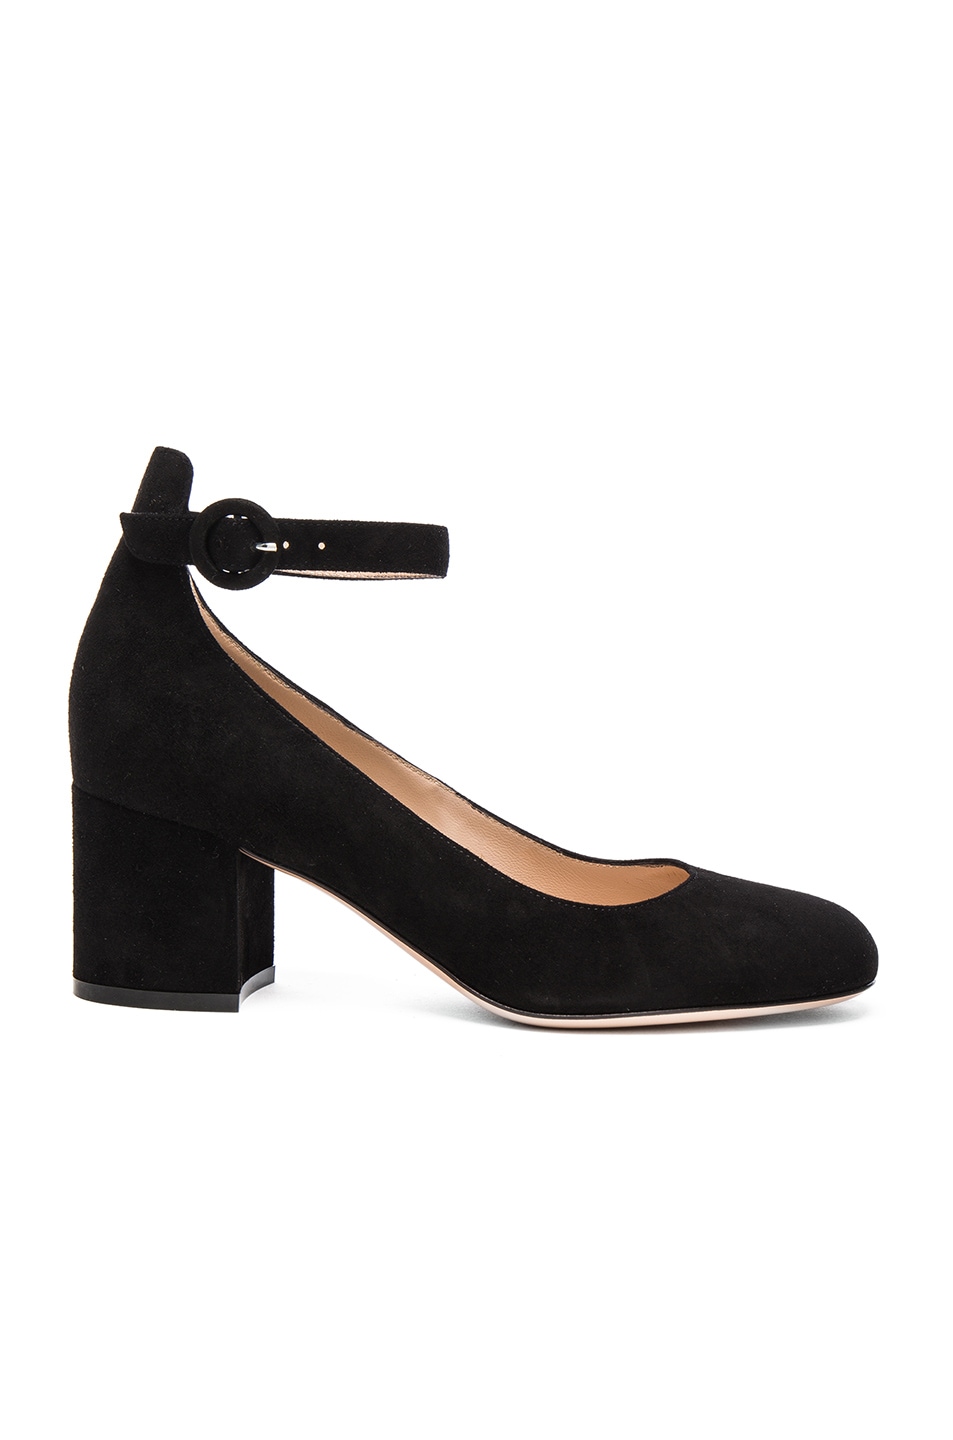 Image 1 of Gianvito Rossi Suede Ankle Strap Flats in Black